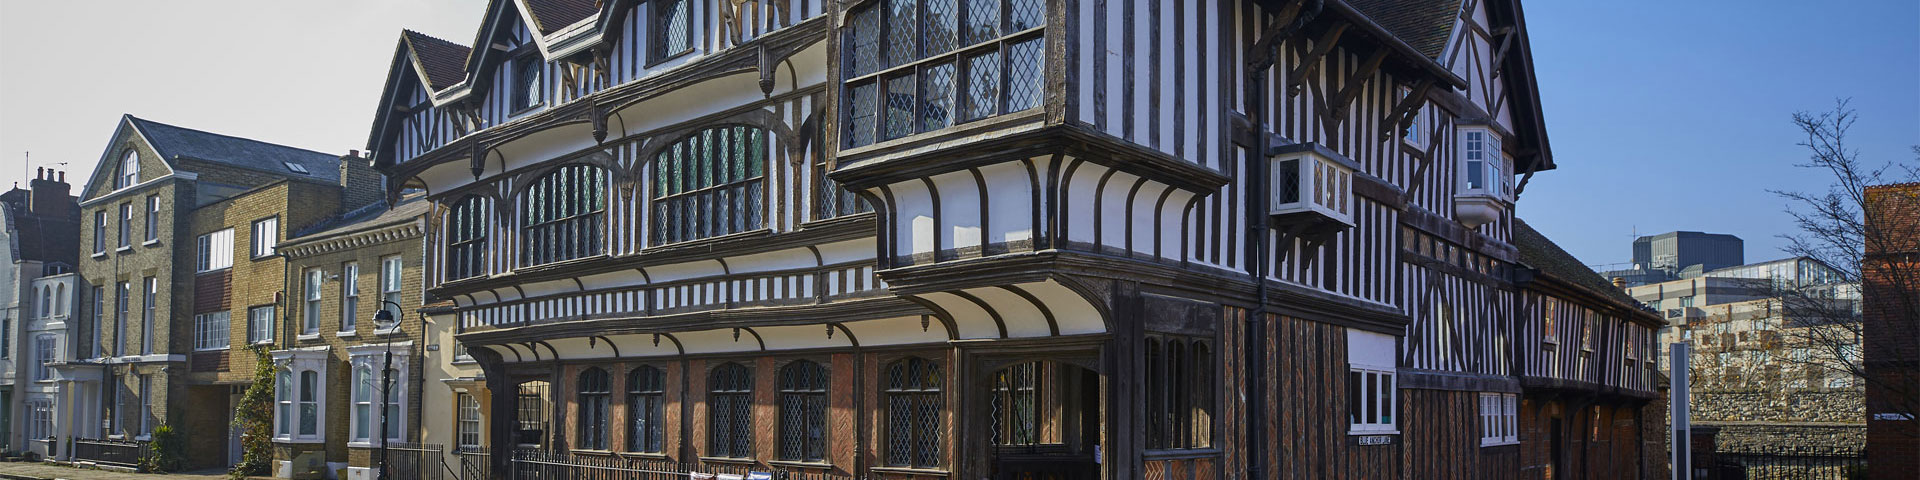 Exterior shot of the Tudor House museum in Southampton